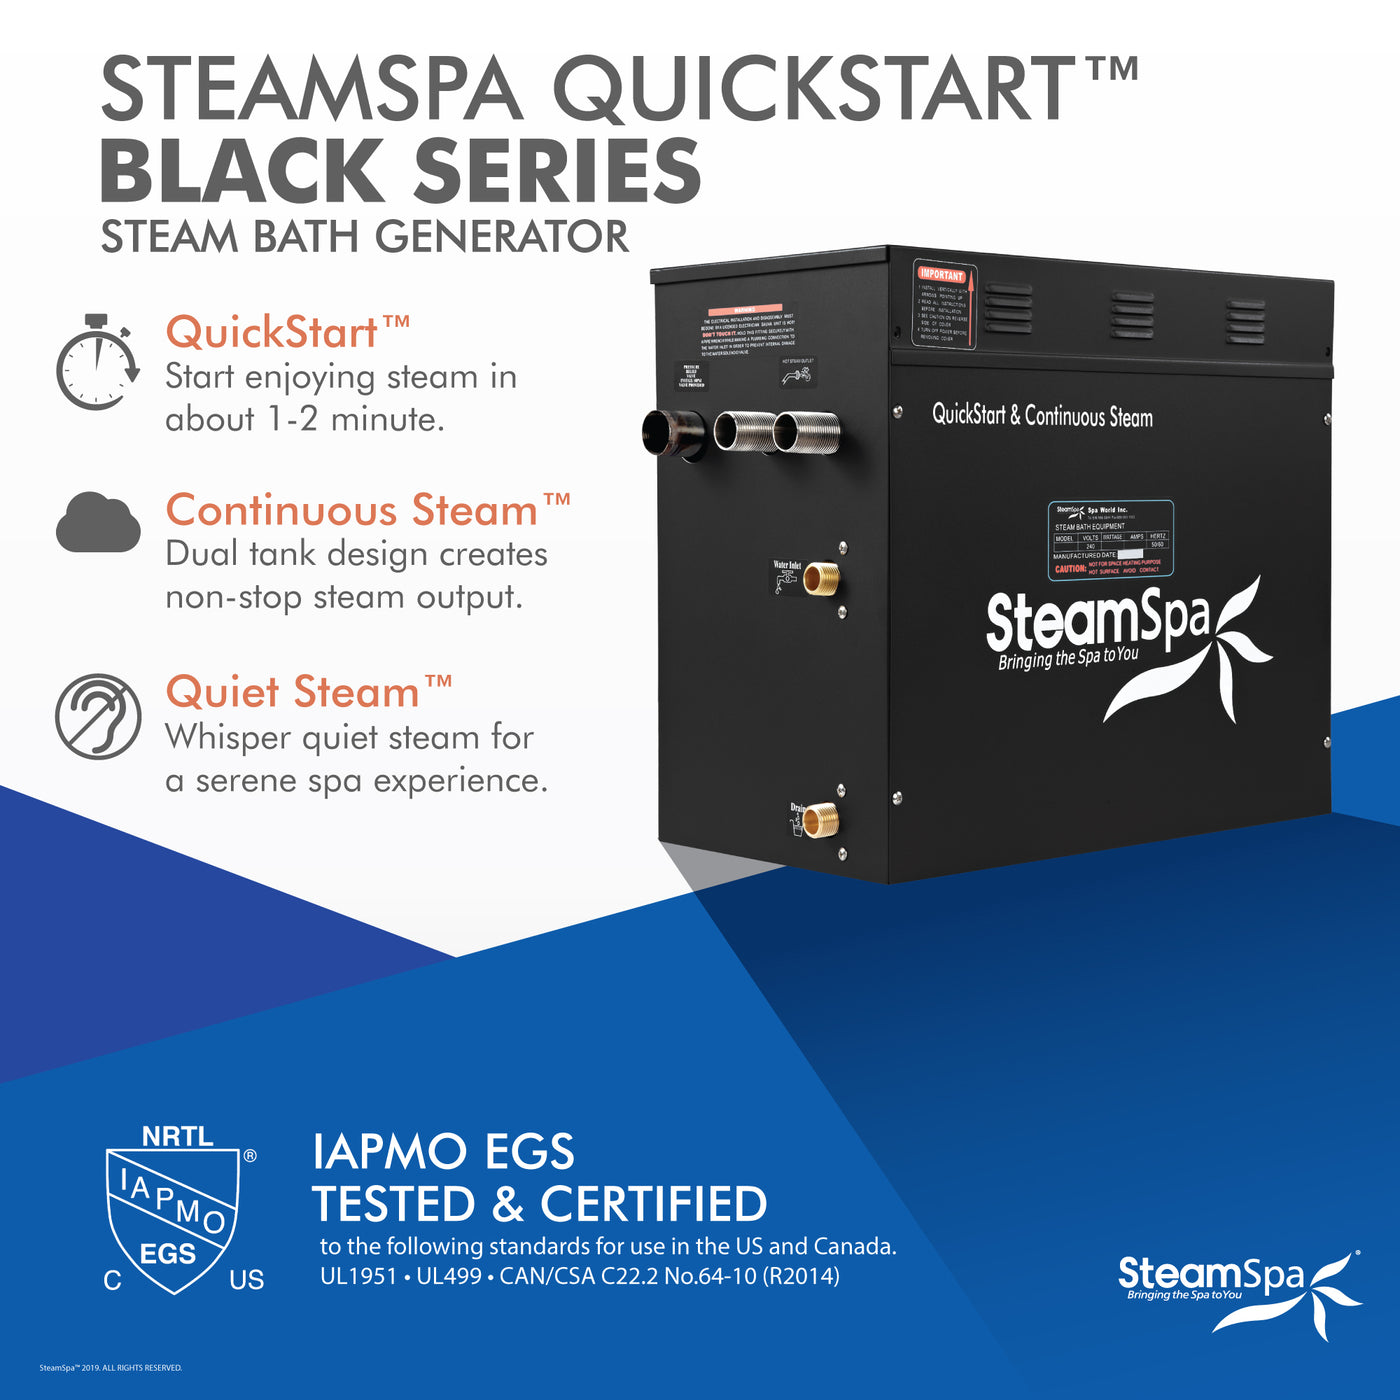 Black Series WiFi and Bluetooth 2 x 12kW QuickStart Steam Bath Generator Package with Dual Aroma Pump in Gold BKT2400GD-ADP